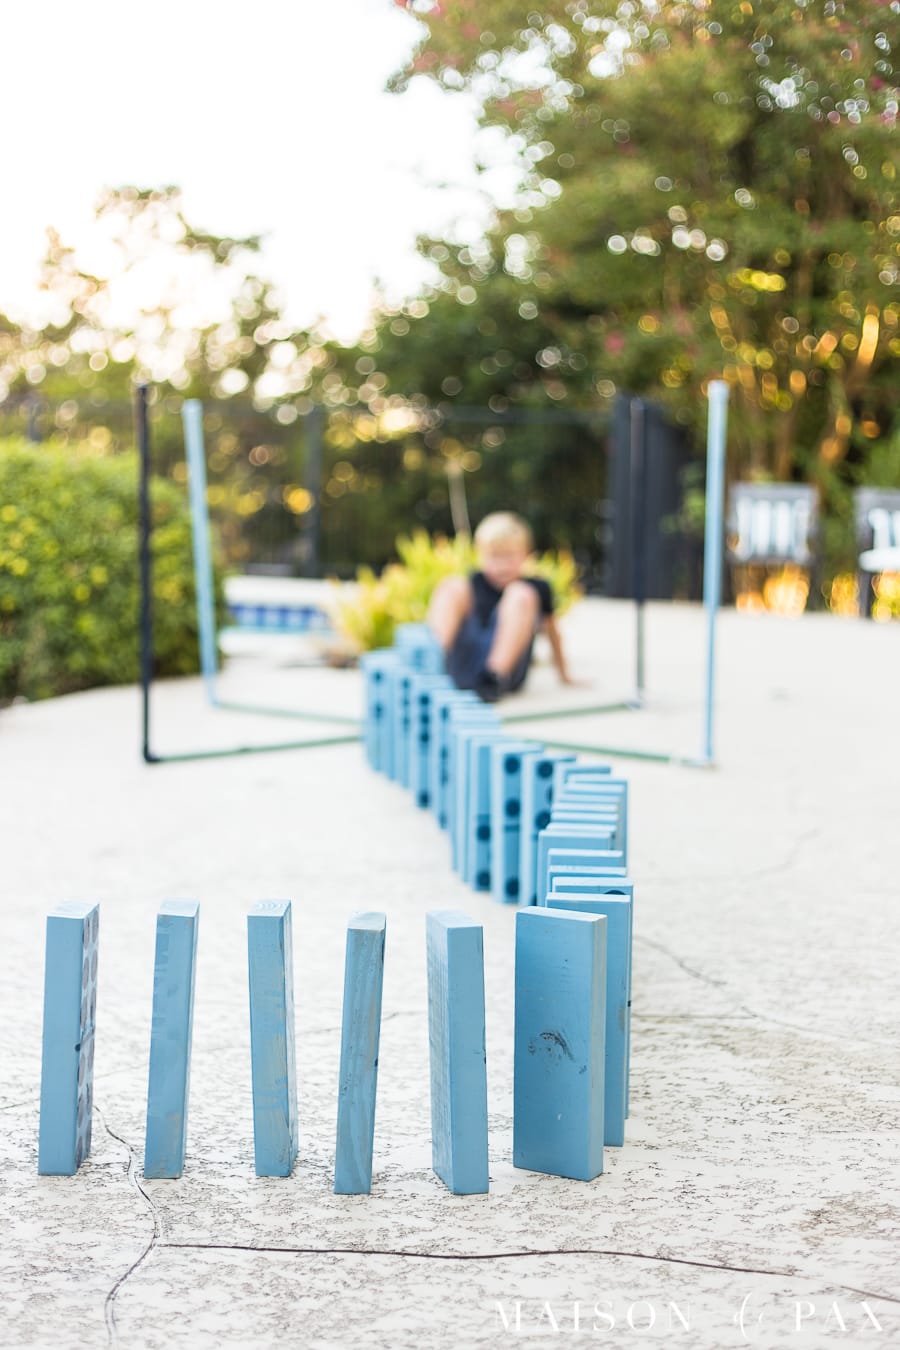 Make giant dominoes with your kids: find family projects plus tips for completing project with kids! #familyfun #familyproject #outdoorgames #kidfriendlyproject #diyproject